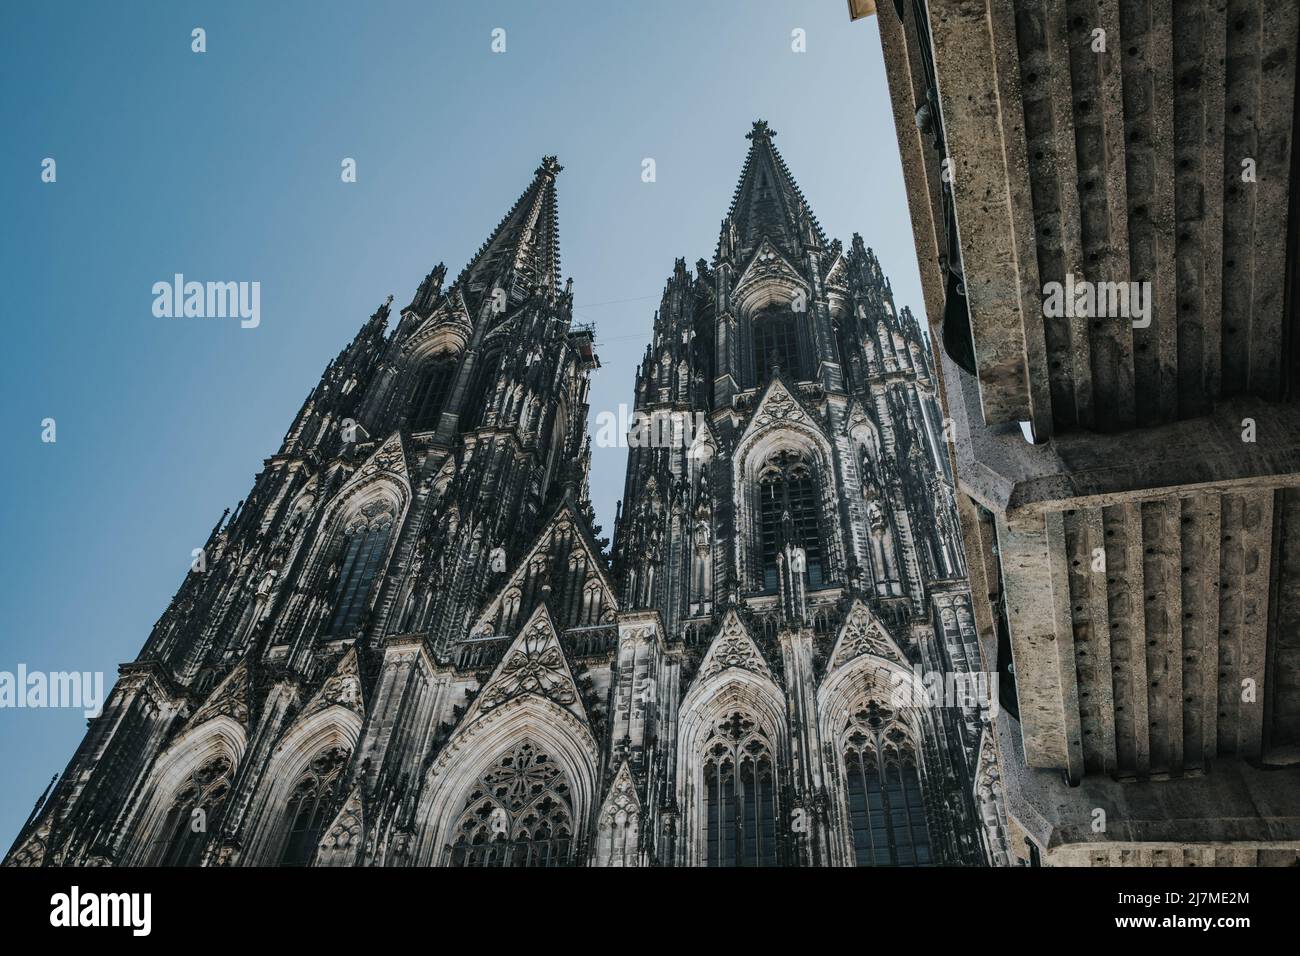 Looking up at the Kölner Dom (Cologne Cathedral) Stock Photo